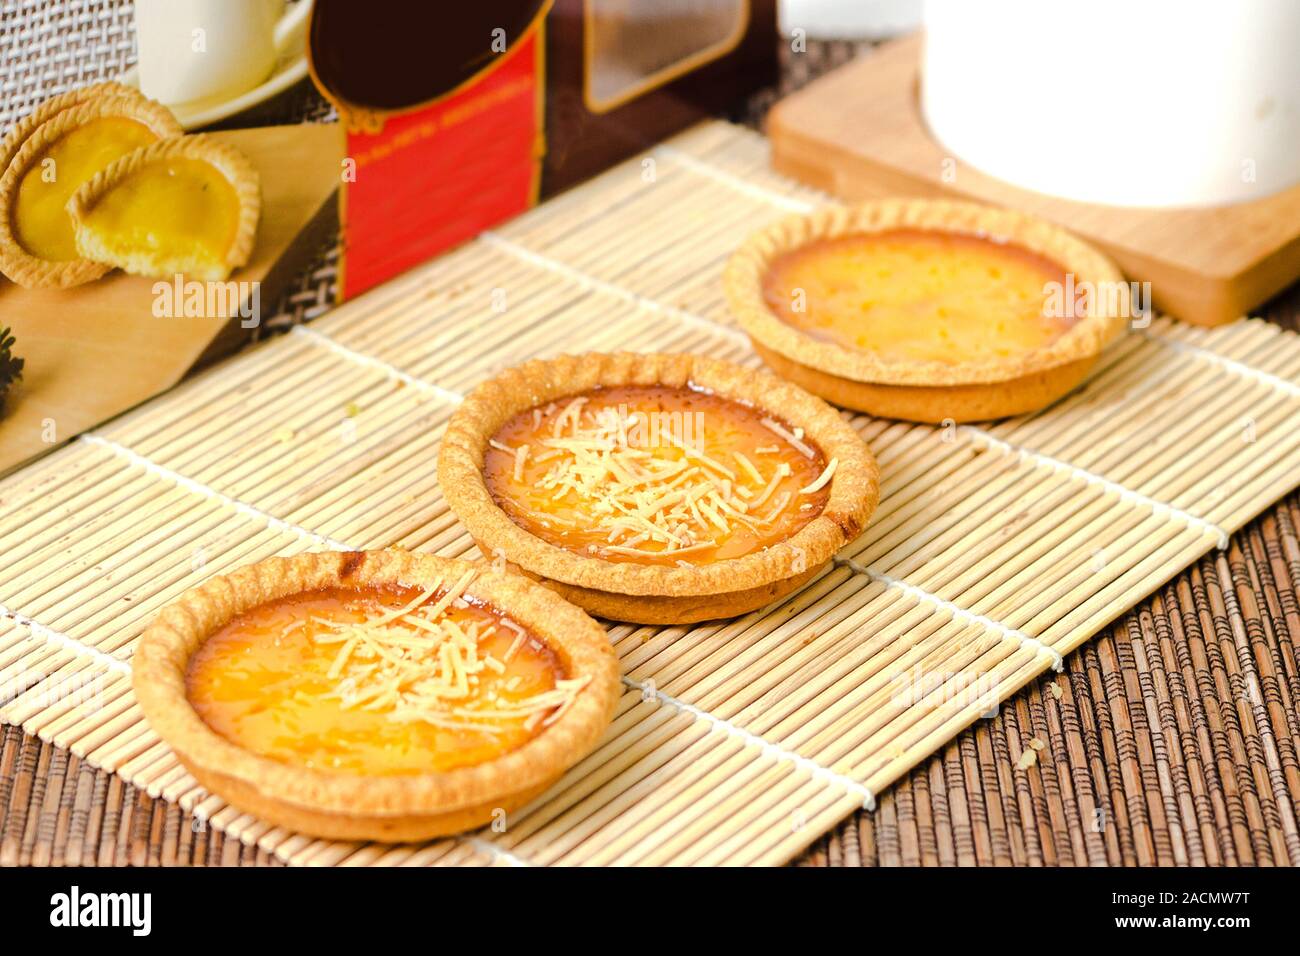 freshly baked pie with cheese toping on a natural wooden rustic Stock Photo